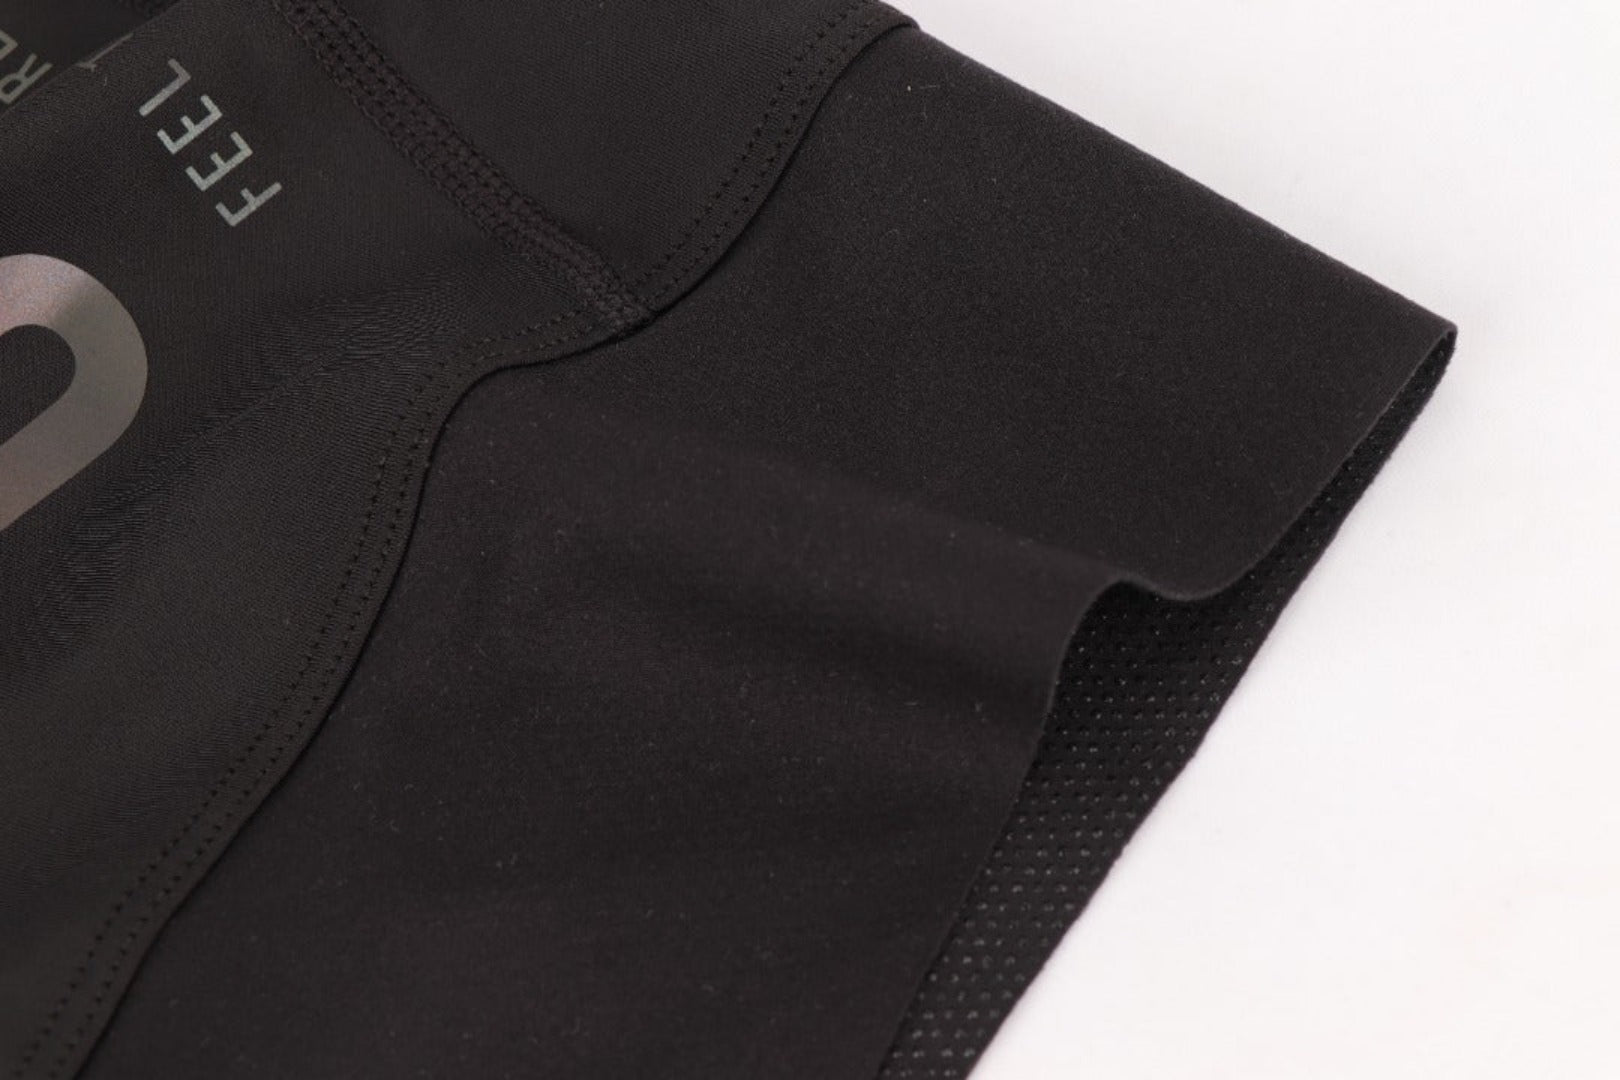 Elastic leg grippers. Men's black magnetic snap buckle bib shorts. CAS Feel the freedom grey to colourful reflective logo.